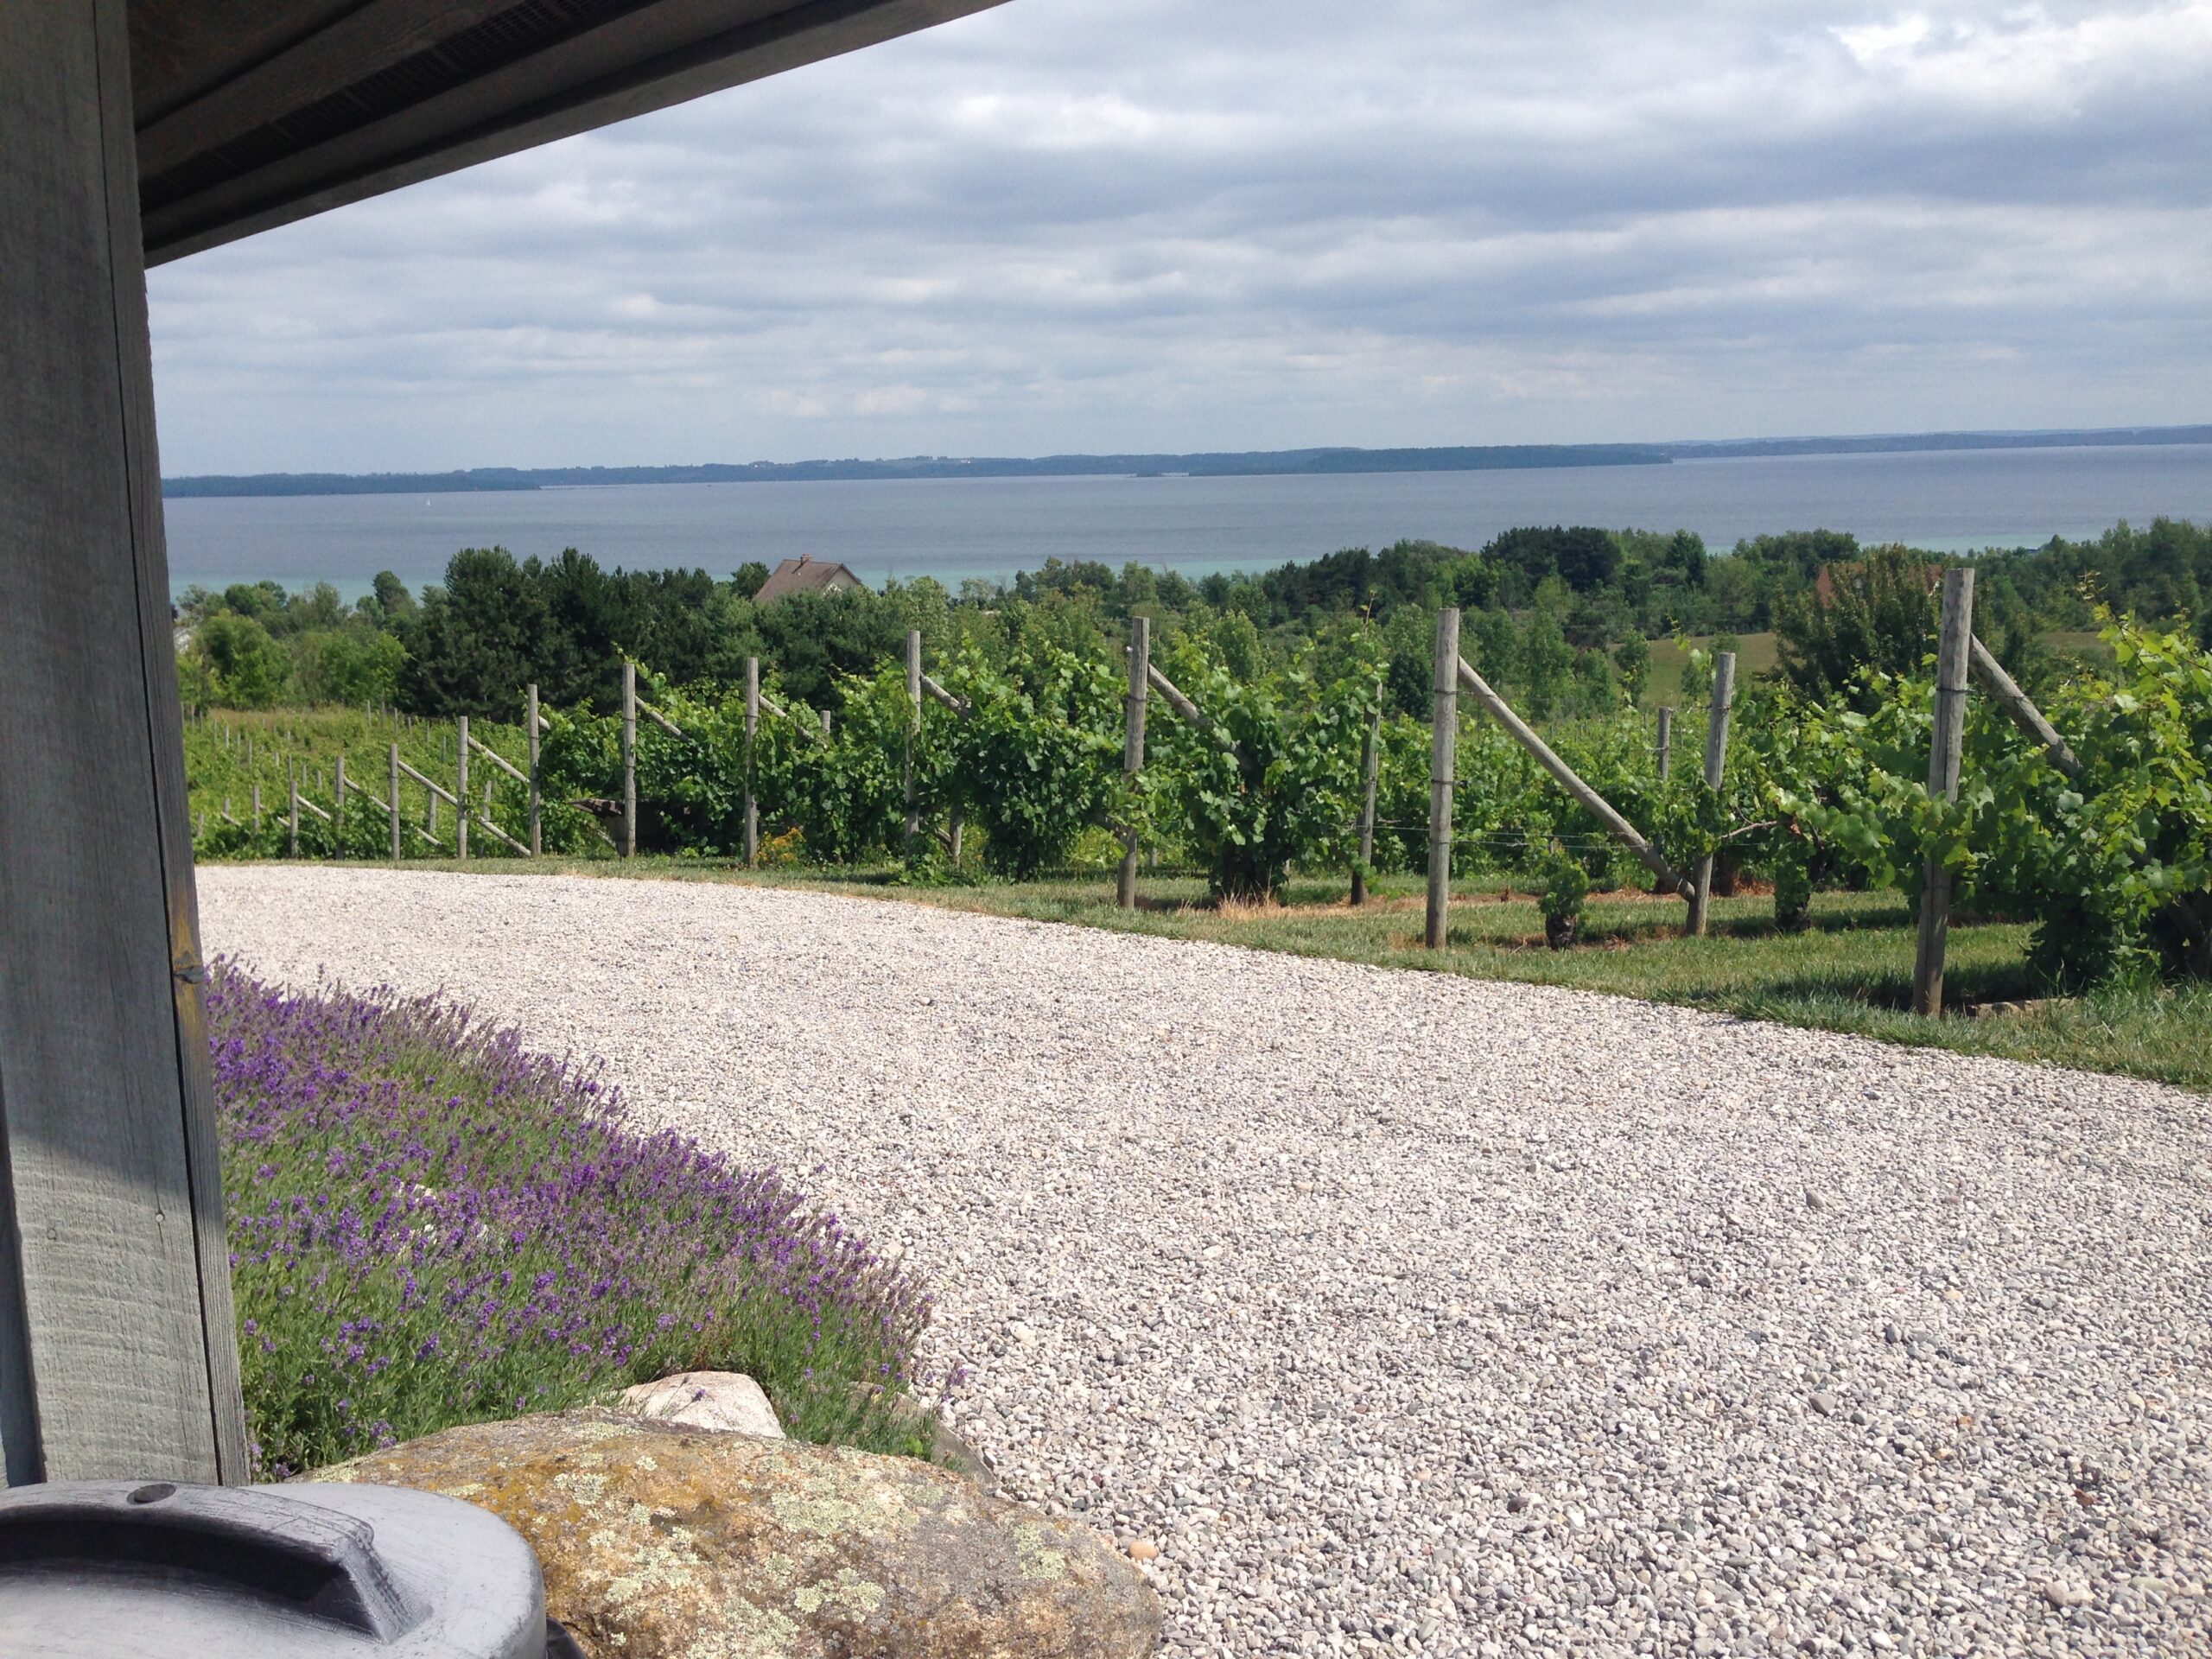 There are so many things to do when visiting Traverse City. Here, a view of the bay from a winery.